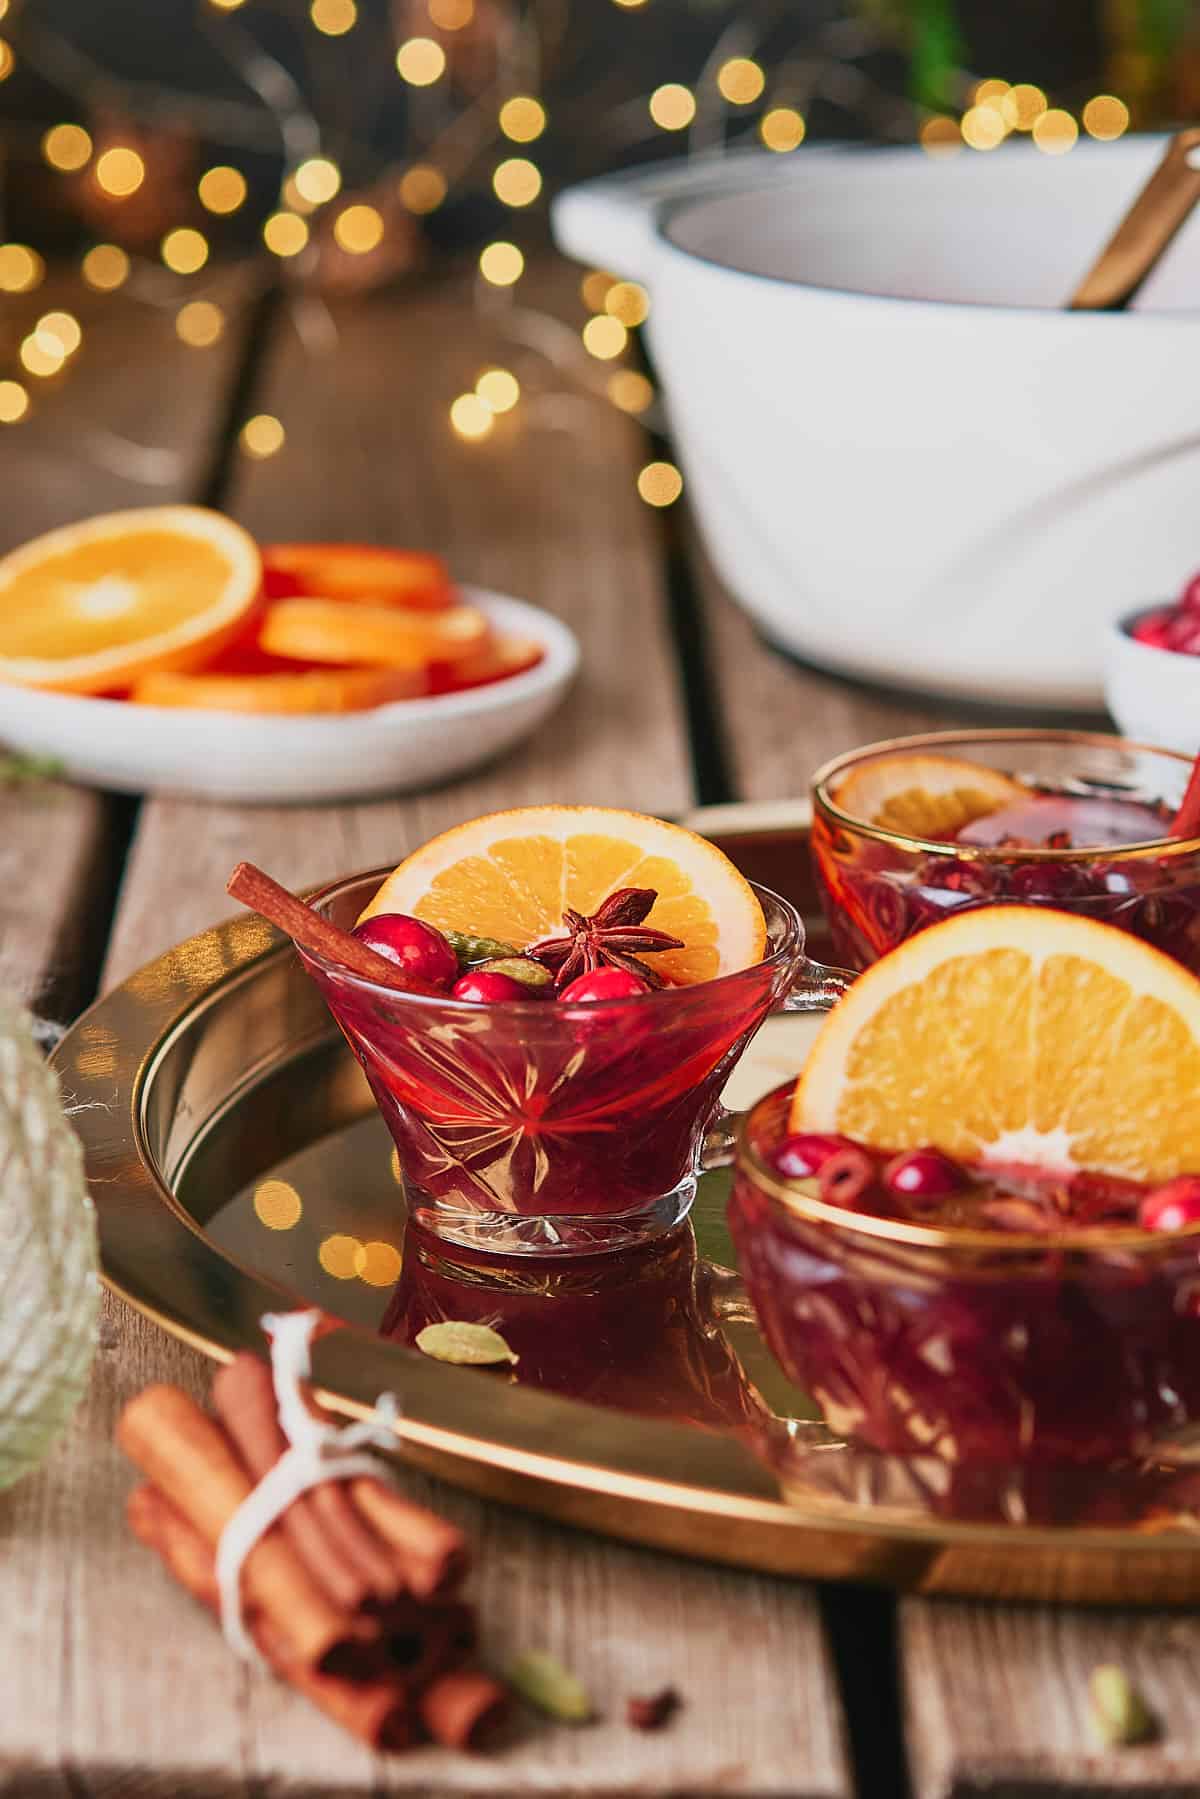 Glasses of mulled red wine and gin on a gold platter, on a wooden table with twinkly lights, oranges and a stock pot in the background. 